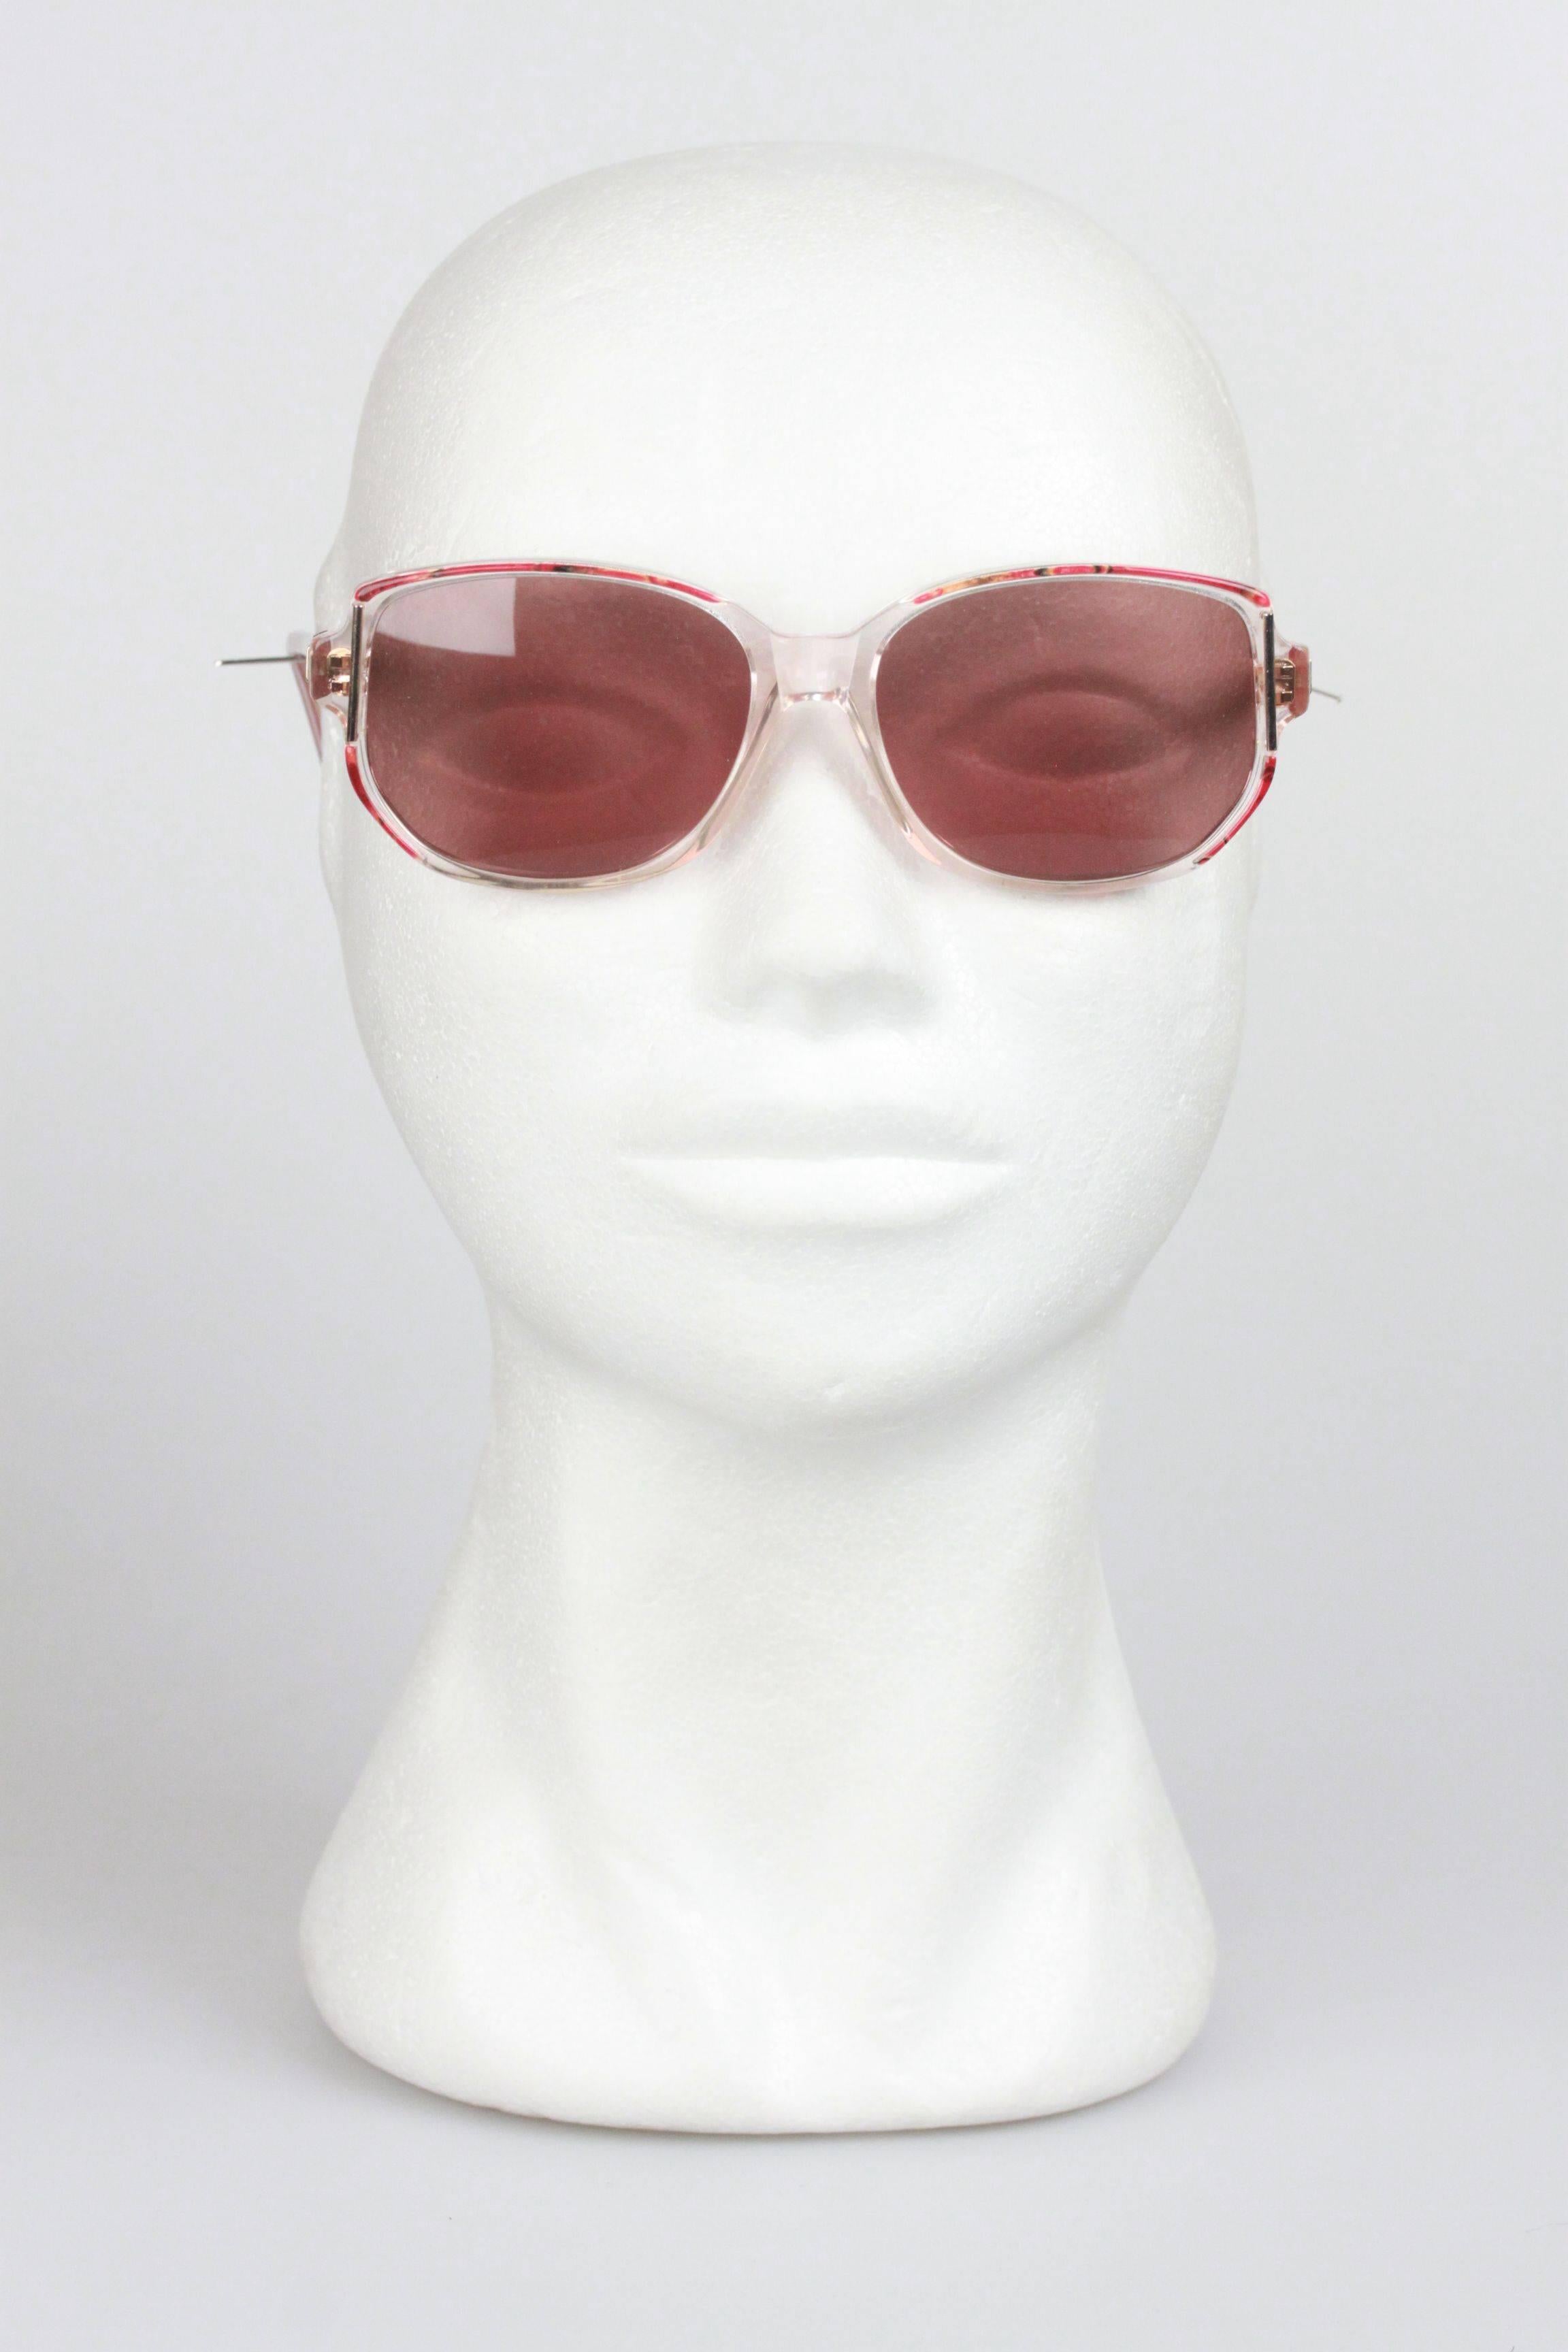 GIVENCHY Vintage MINT Womens SUNGLASSES G8913 950 Red marbled 54-16 mm 3